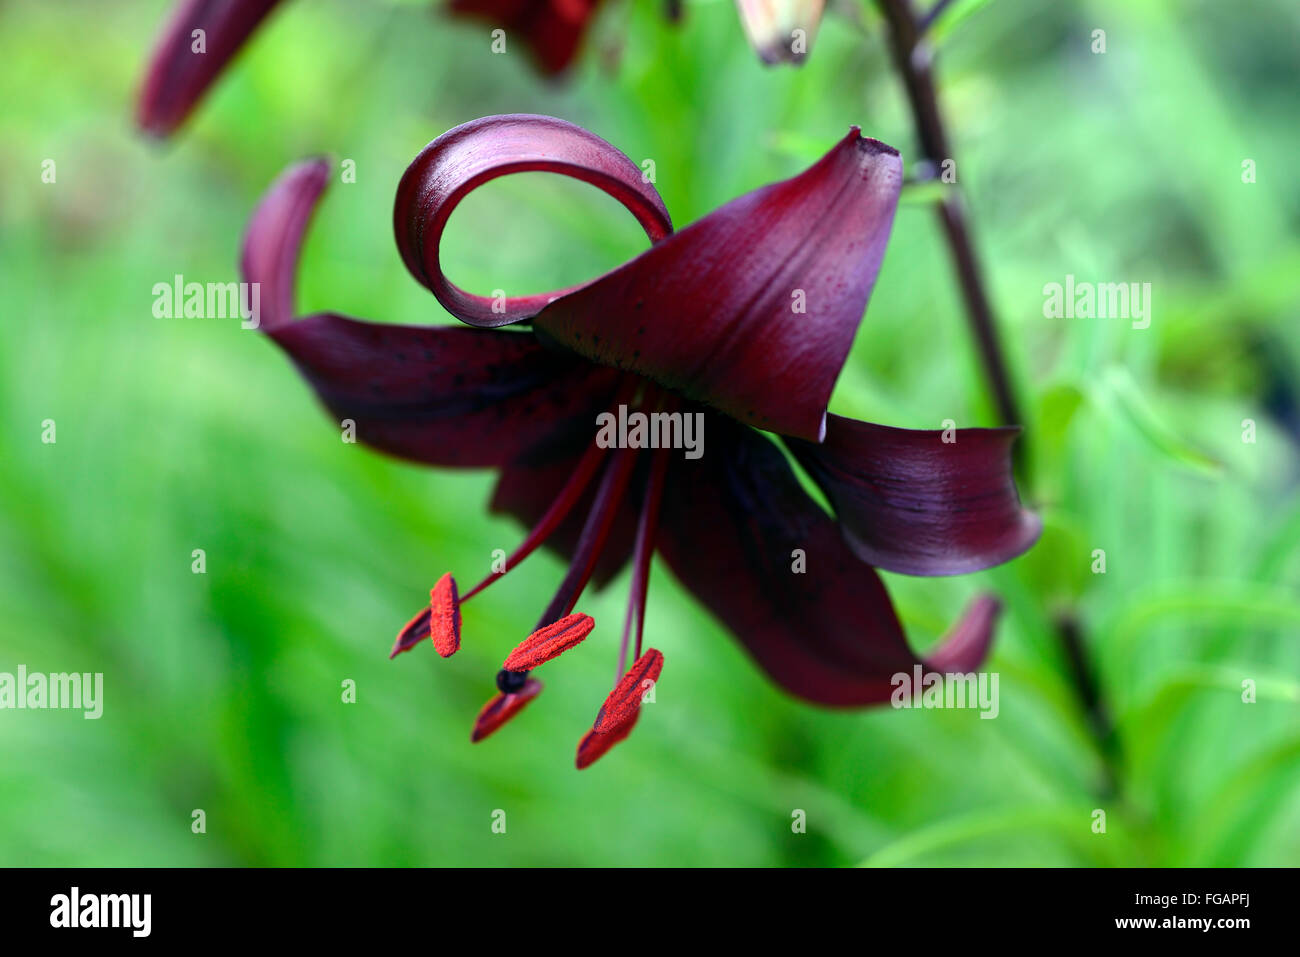 lilium night flyer Asiatic Lilies lily dark red black downward facing flowers flower bloom blossom RM floral Stock Photo